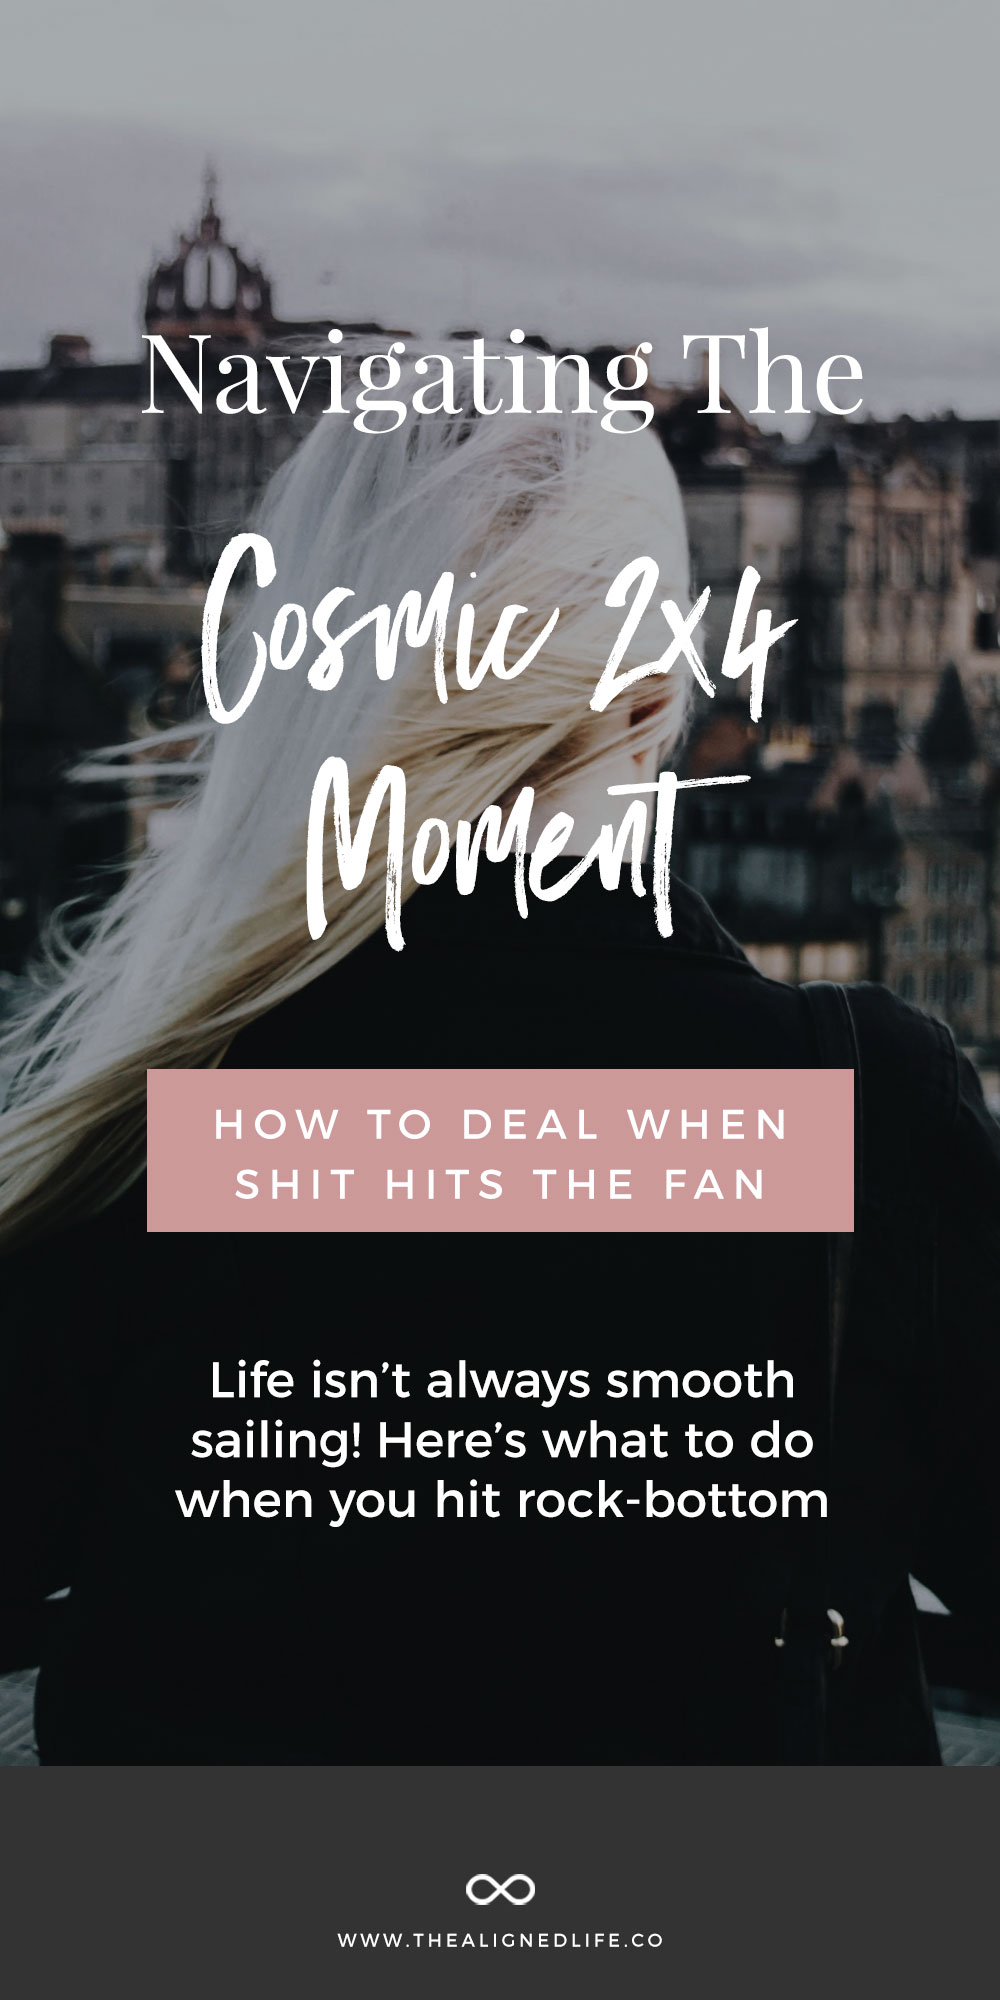 Navigating The Cosmic 2x4 Moment: How To Deal When Shit Hits The Fan